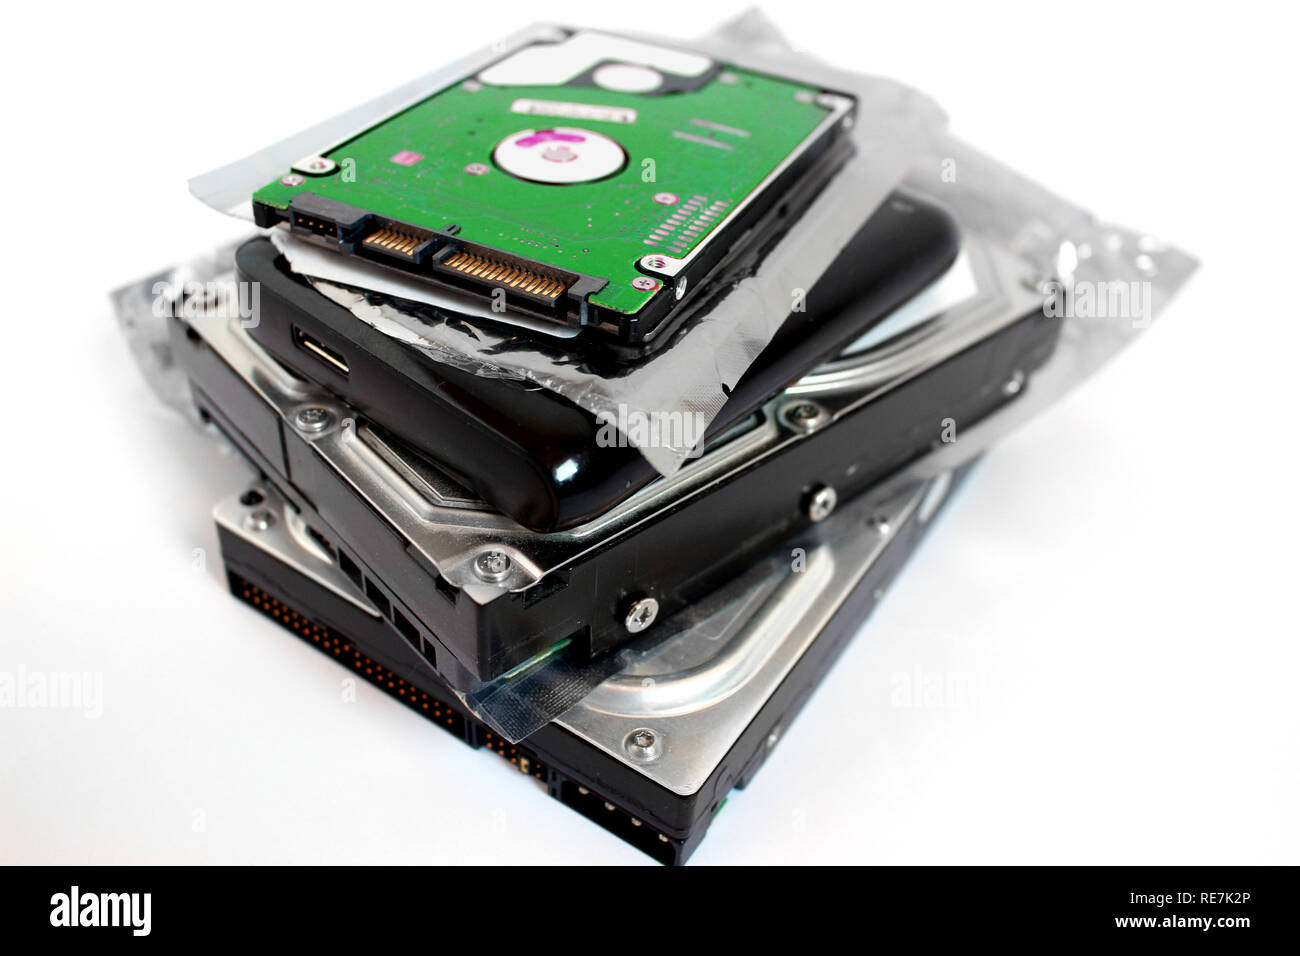 Pile of hard discs, 3.5 hdd, 2.5hdd, external hdd, anti static bag Stock Photo